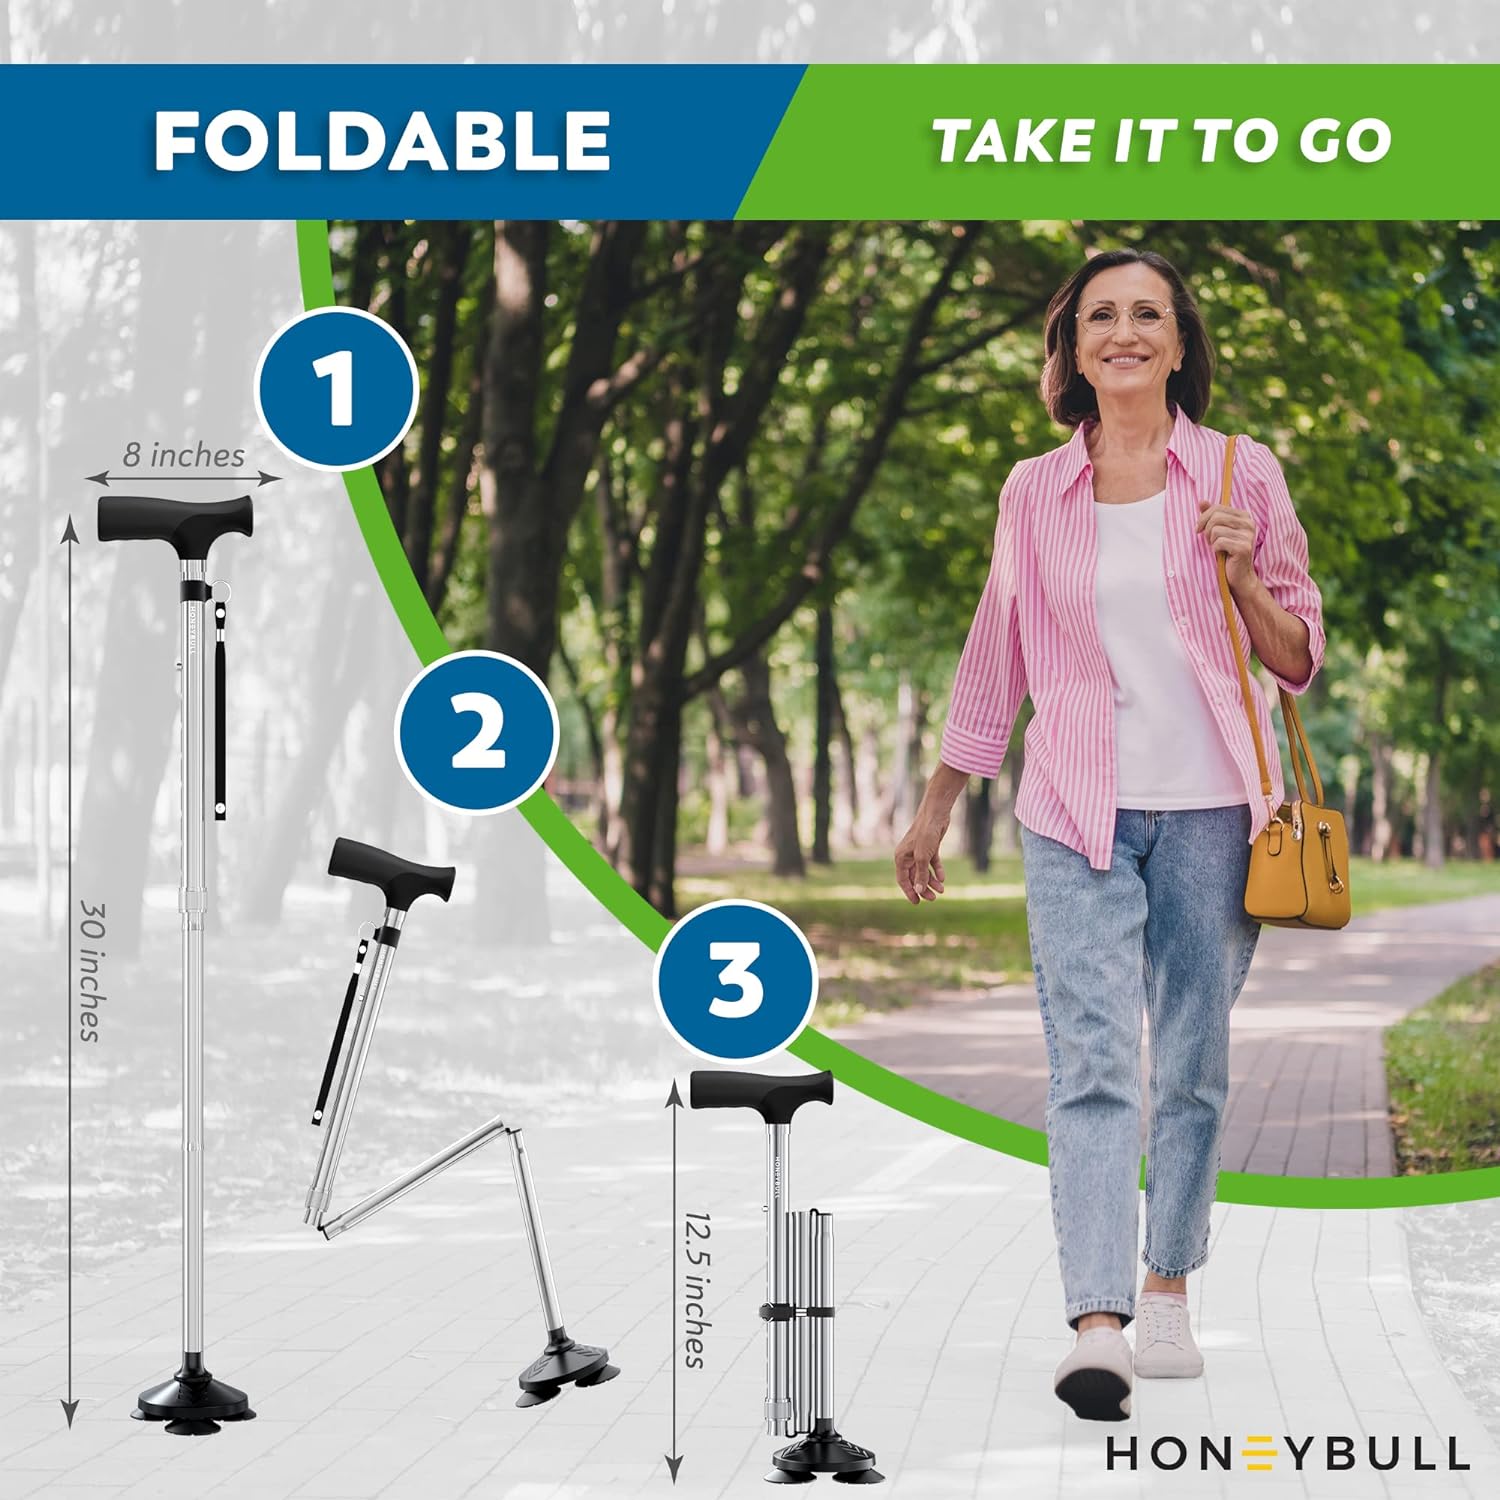 HONEYBULL Walking Cane for Men  Women - Foldable, Adjustable, Collapsible, Free Standing Cane, Pivot Tip, Heavy Duty, with Travel Bag | Walking Sticks, Folding Canes for Seniors  Adults [Silver]